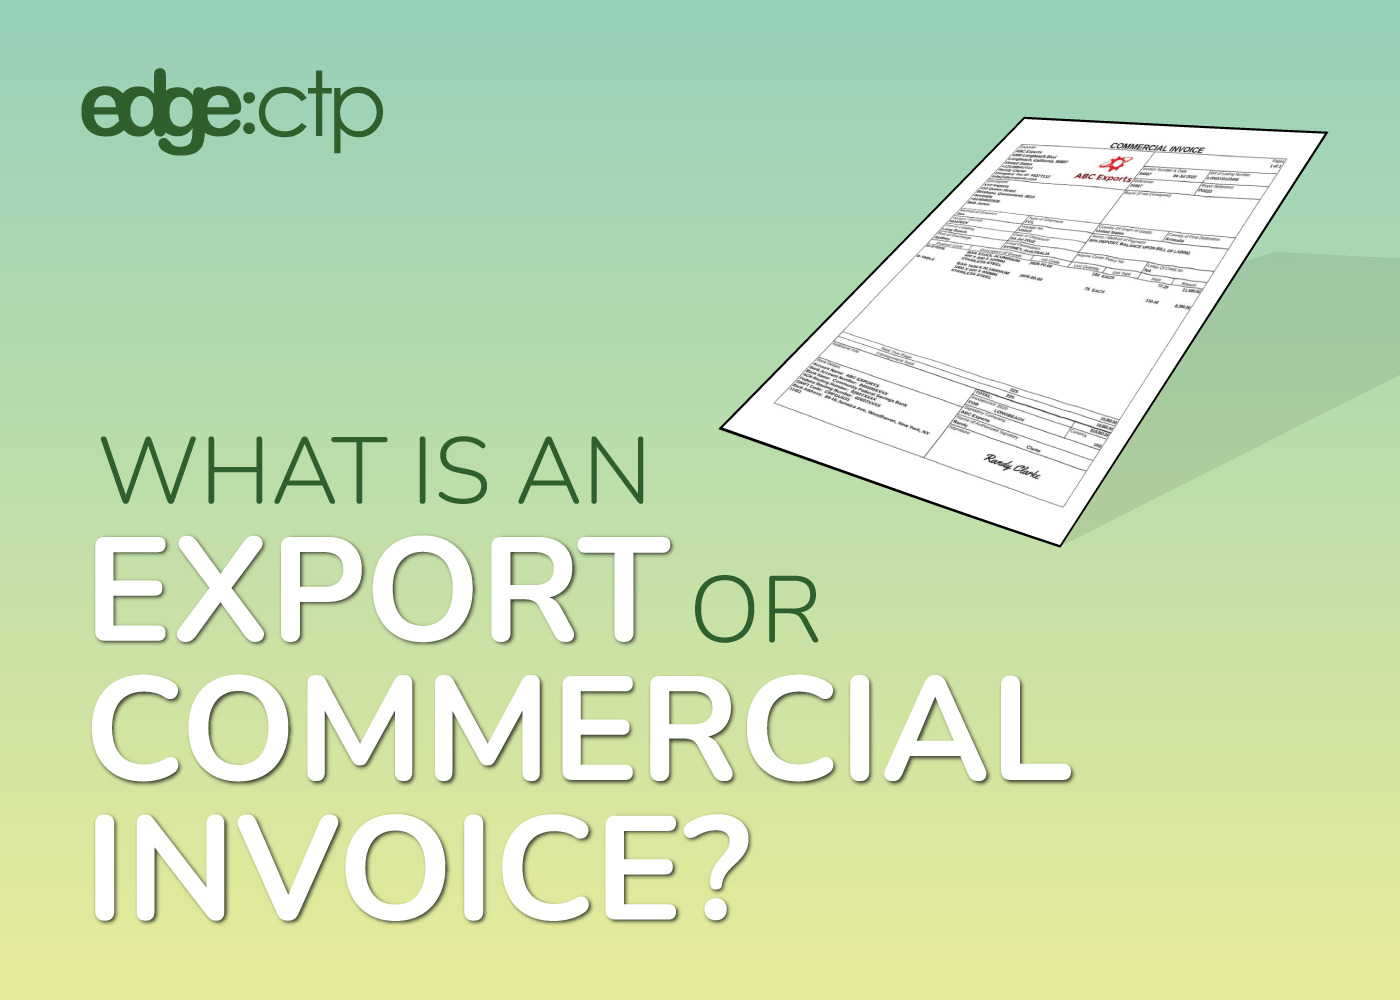 How to create a Export or commercial invoice in EdgeCTP